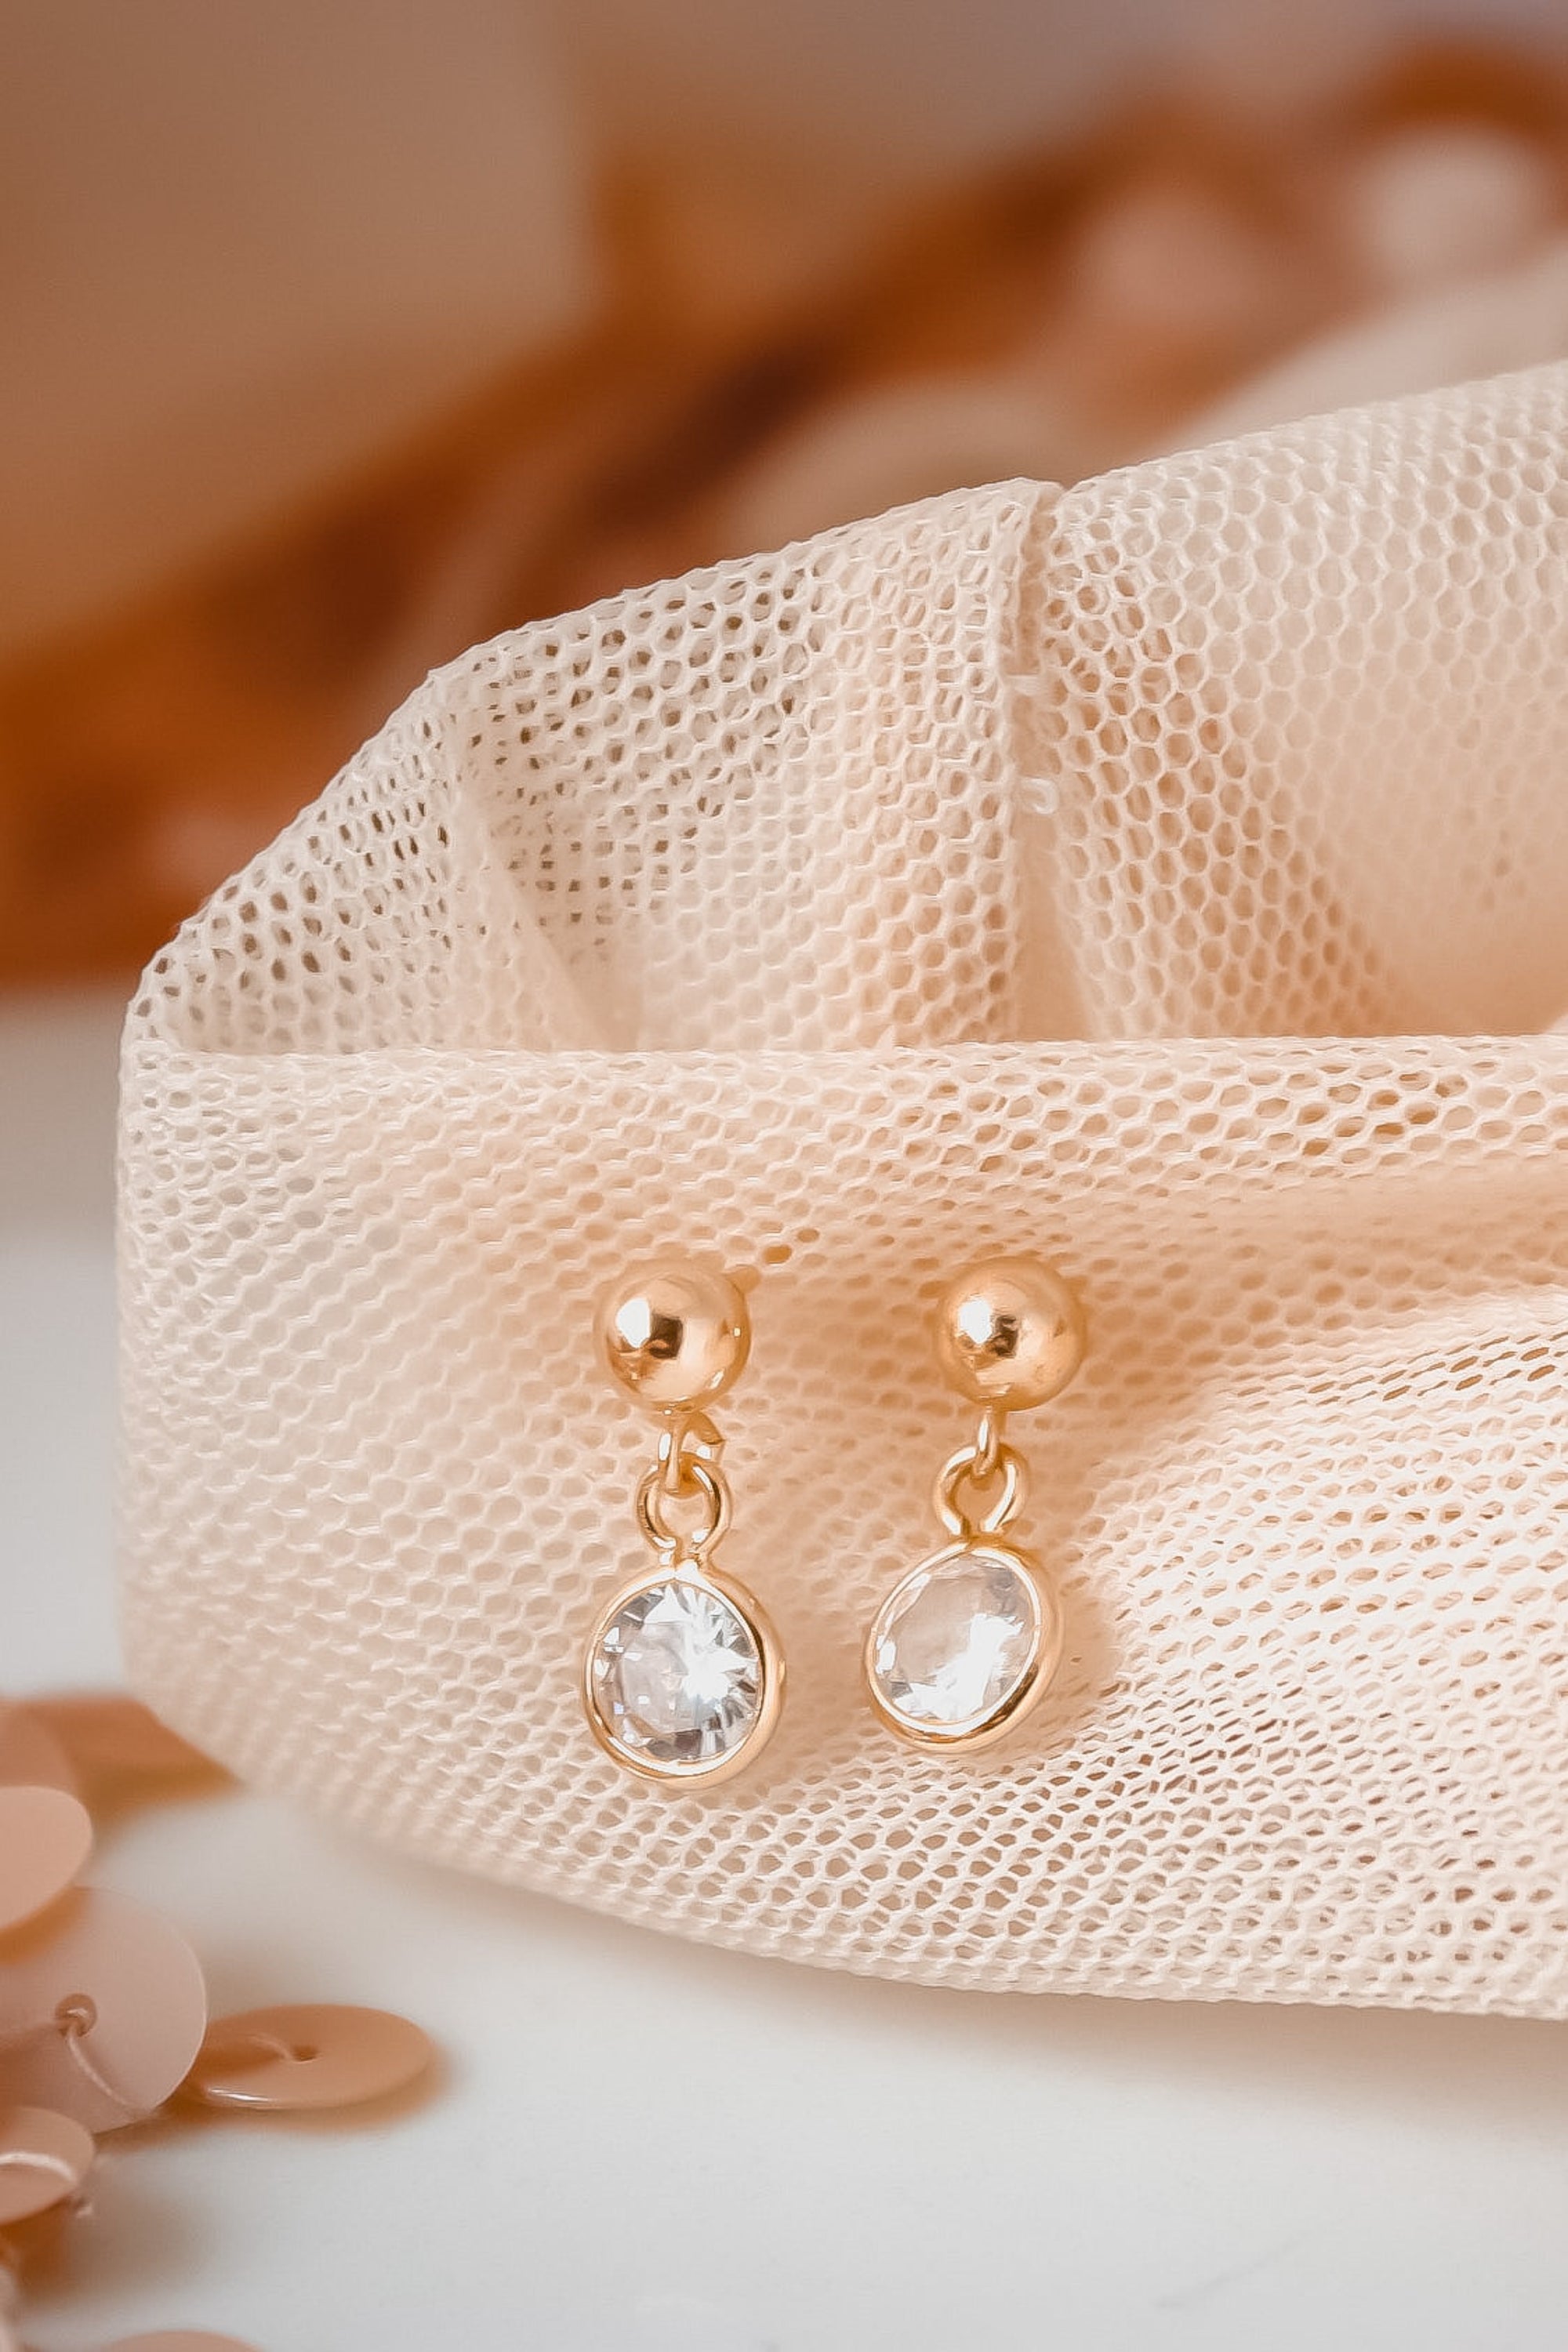 "Gold-filled ball stud earrings with classic timeless design, featuring a shimmering cubic zirconia gemstone drop.